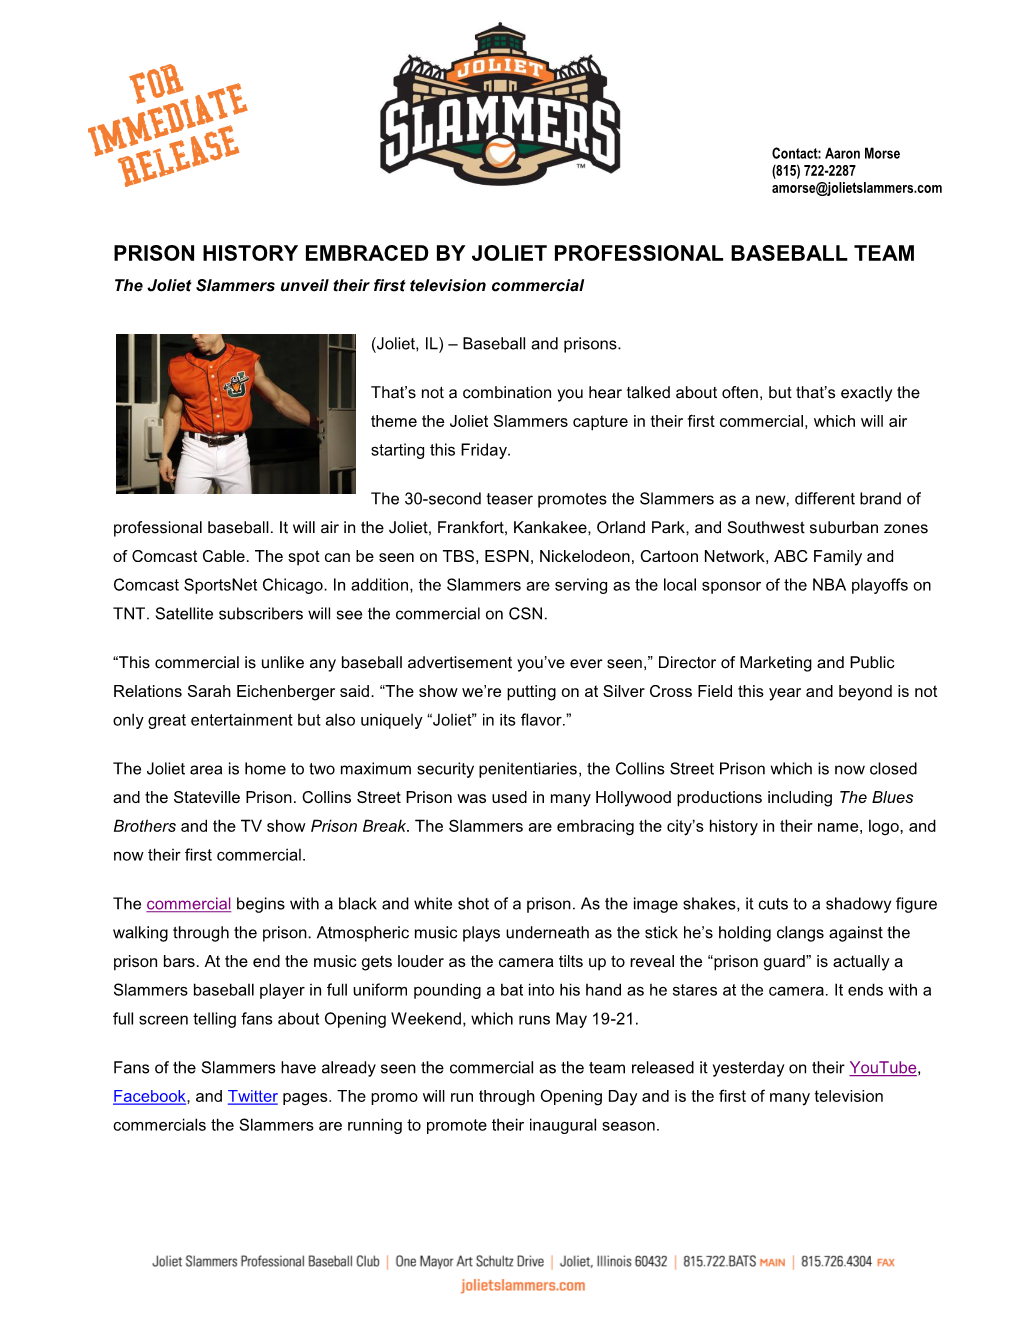 PRISON HISTORY EMBRACED by JOLIET PROFESSIONAL BASEBALL TEAM the Joliet Slammers Unveil Their First Television Commercial